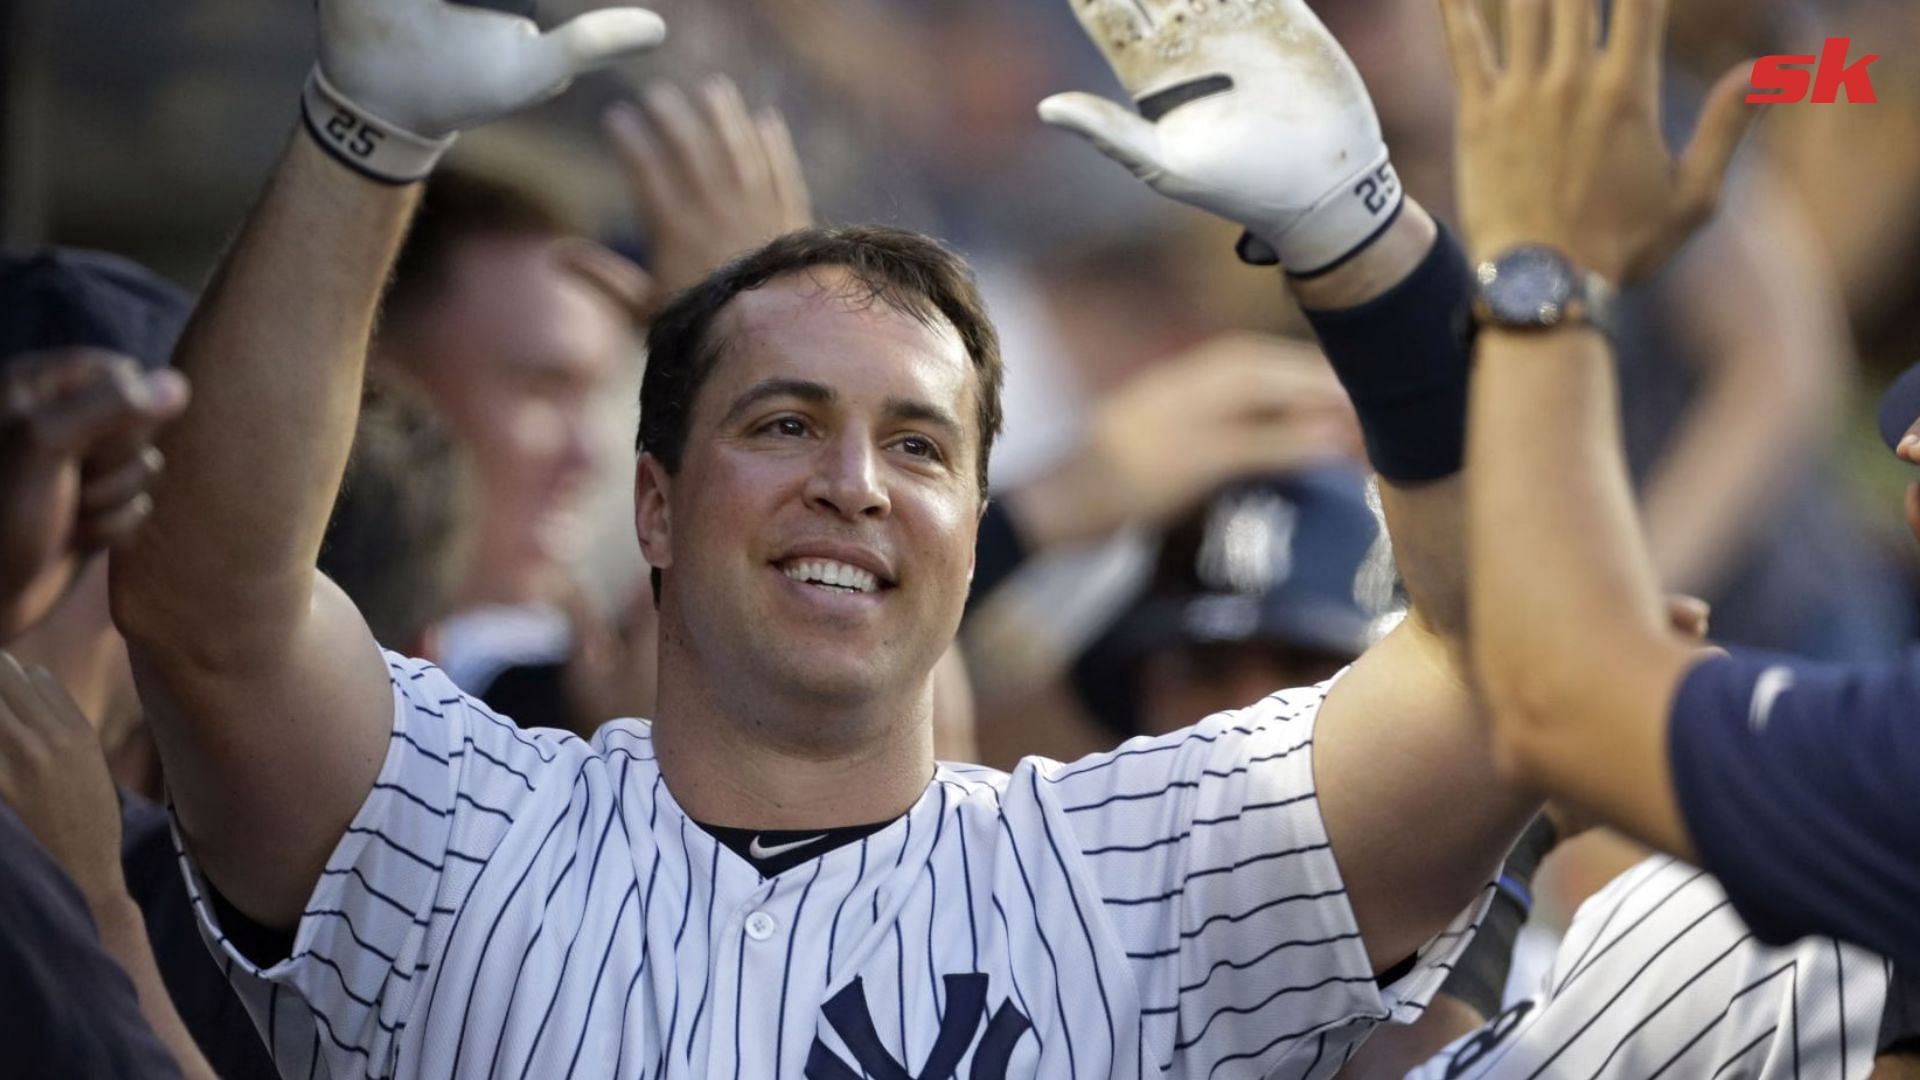 Former Yankees All-Star Mark Teixeira once refuted cheating claims against his Yankees teammates 